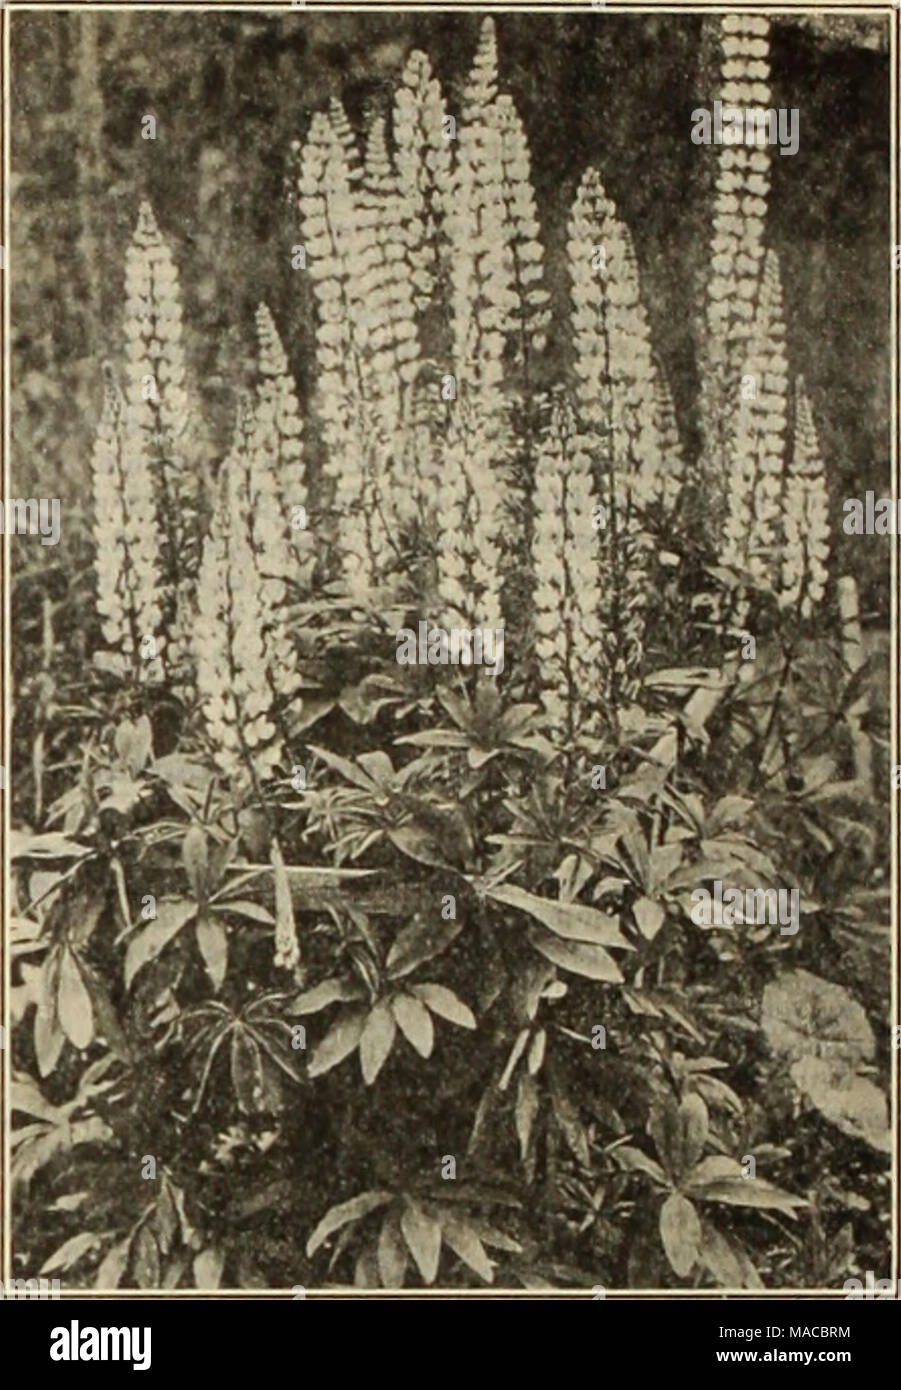 . Dreer's wholesale price list of seeds plants and bulbs for florists : fertilizers, insecticides, tools and sundries . LUI'INUS PUI.YI'HYLLUS Lysimachia (Loose-strife). Perdoz. Perioo Cillata. 4-inch pots $0 85 Clethroldes. 4-inch pots Fortunei Nummularla. 3-inch pots . .... Punctata. 4-inch pots Lythrum (Rose Loose-strife). Koseum Superbum. Strong Vlrgatum Perry's Variety iNewi Mertensia (Blue Bells). Vlrglnlca. 3-inch pots . 0 85 $6 00 85 6 00 85 6 00 75 5 00 85 6 00 85 6 00 1 50 10 00 2 50 Monarda (Horse Mint). Dldyma. 4-inch pots • Rosea. 4-inch pots Spiendens. 4-inch pots Cambridge Scarl Stock Photo